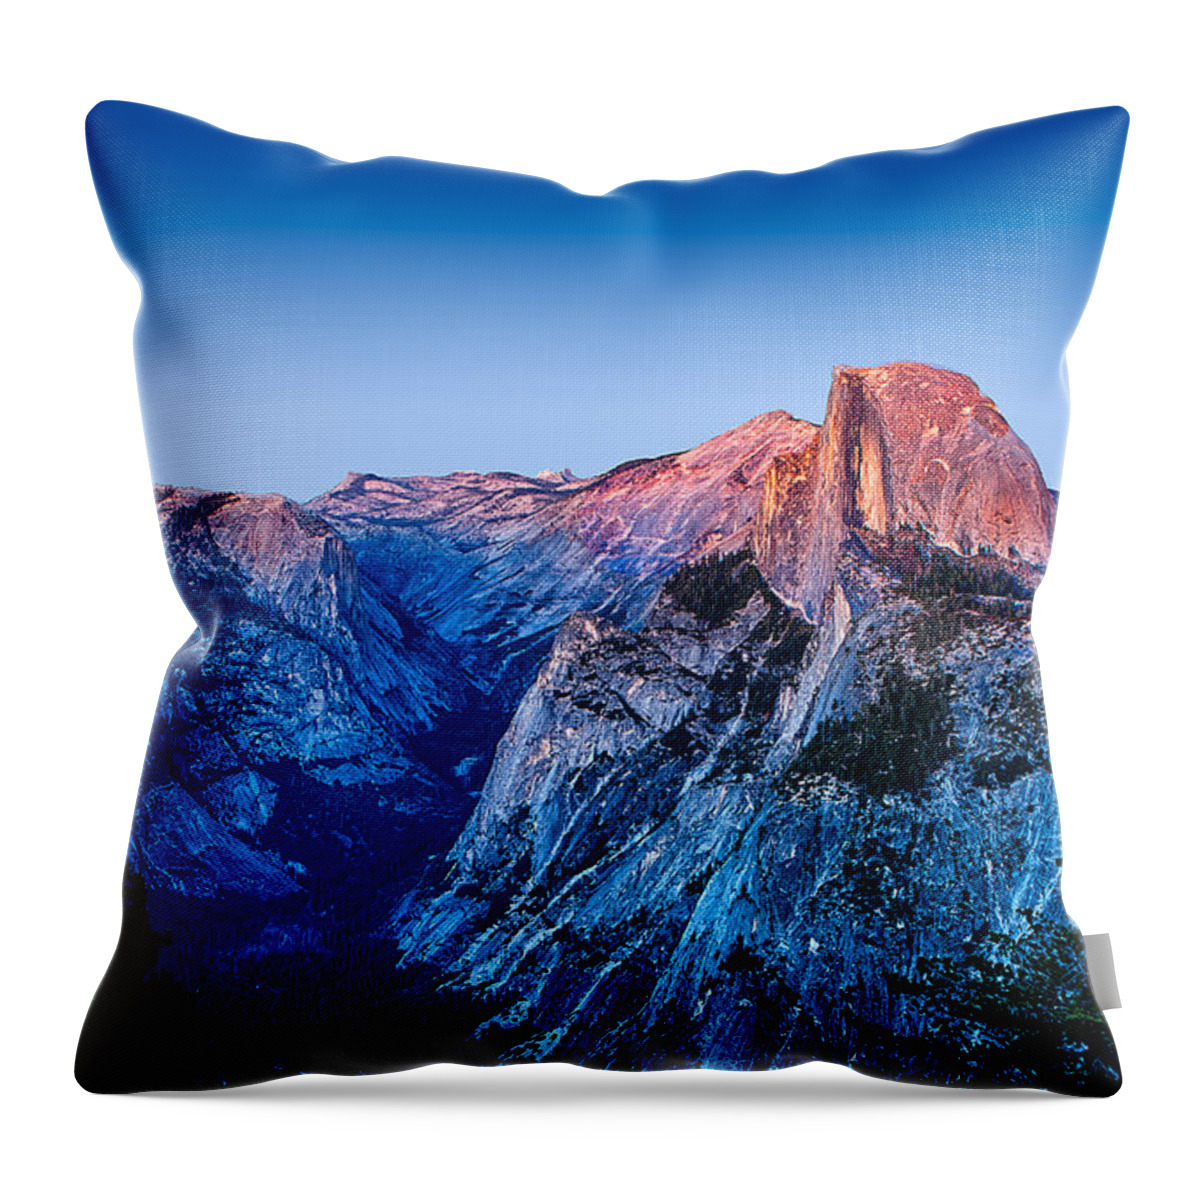 California Throw Pillow featuring the photograph Half Dome Twilight by Peter Tellone